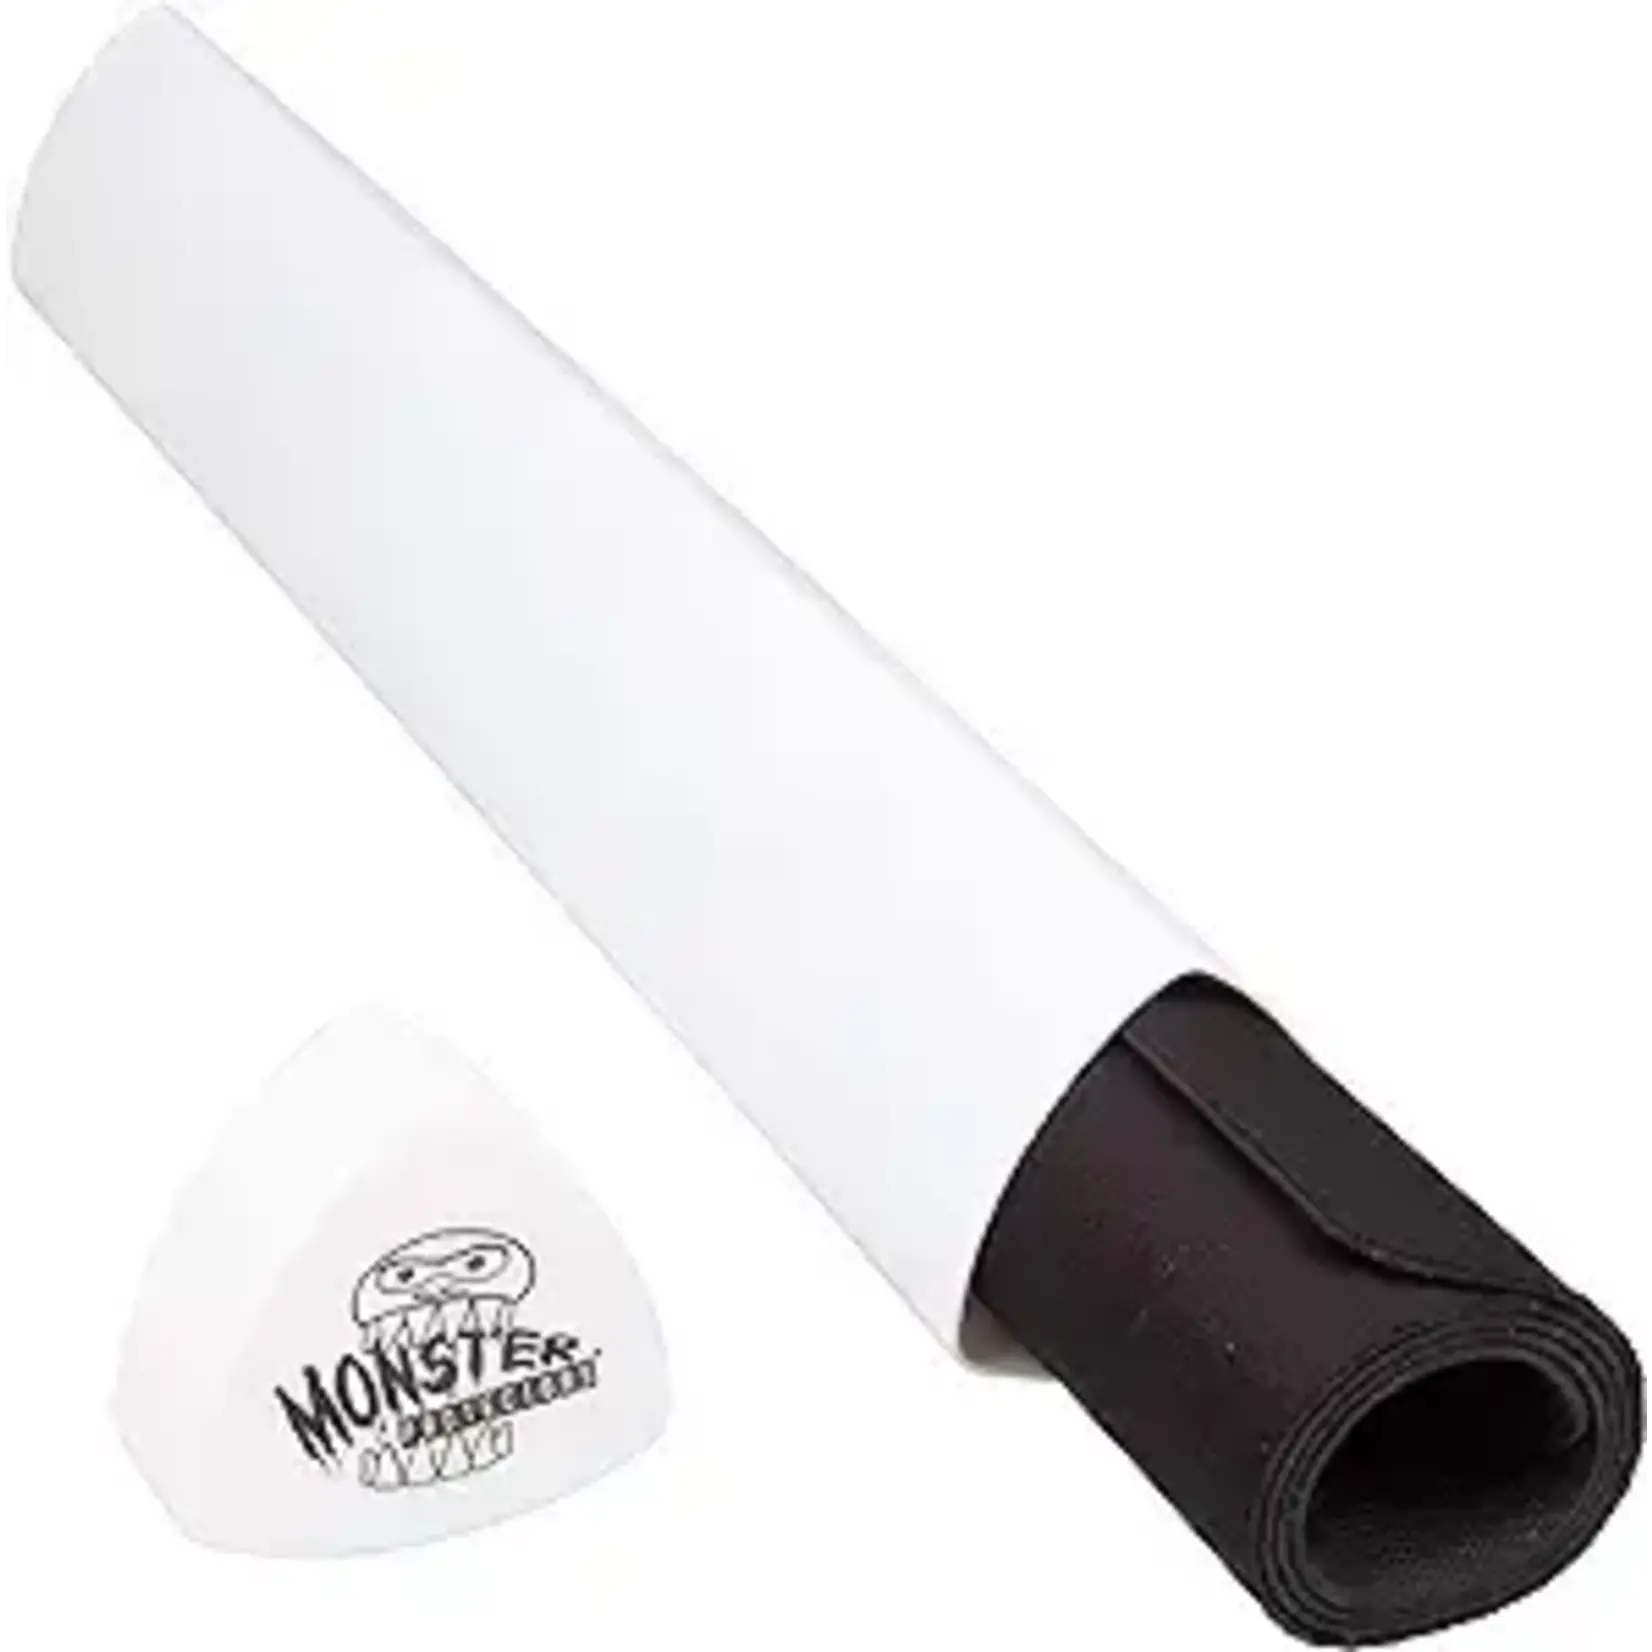 Monster Protectors Playmat Tube: Prism (Opaque White)